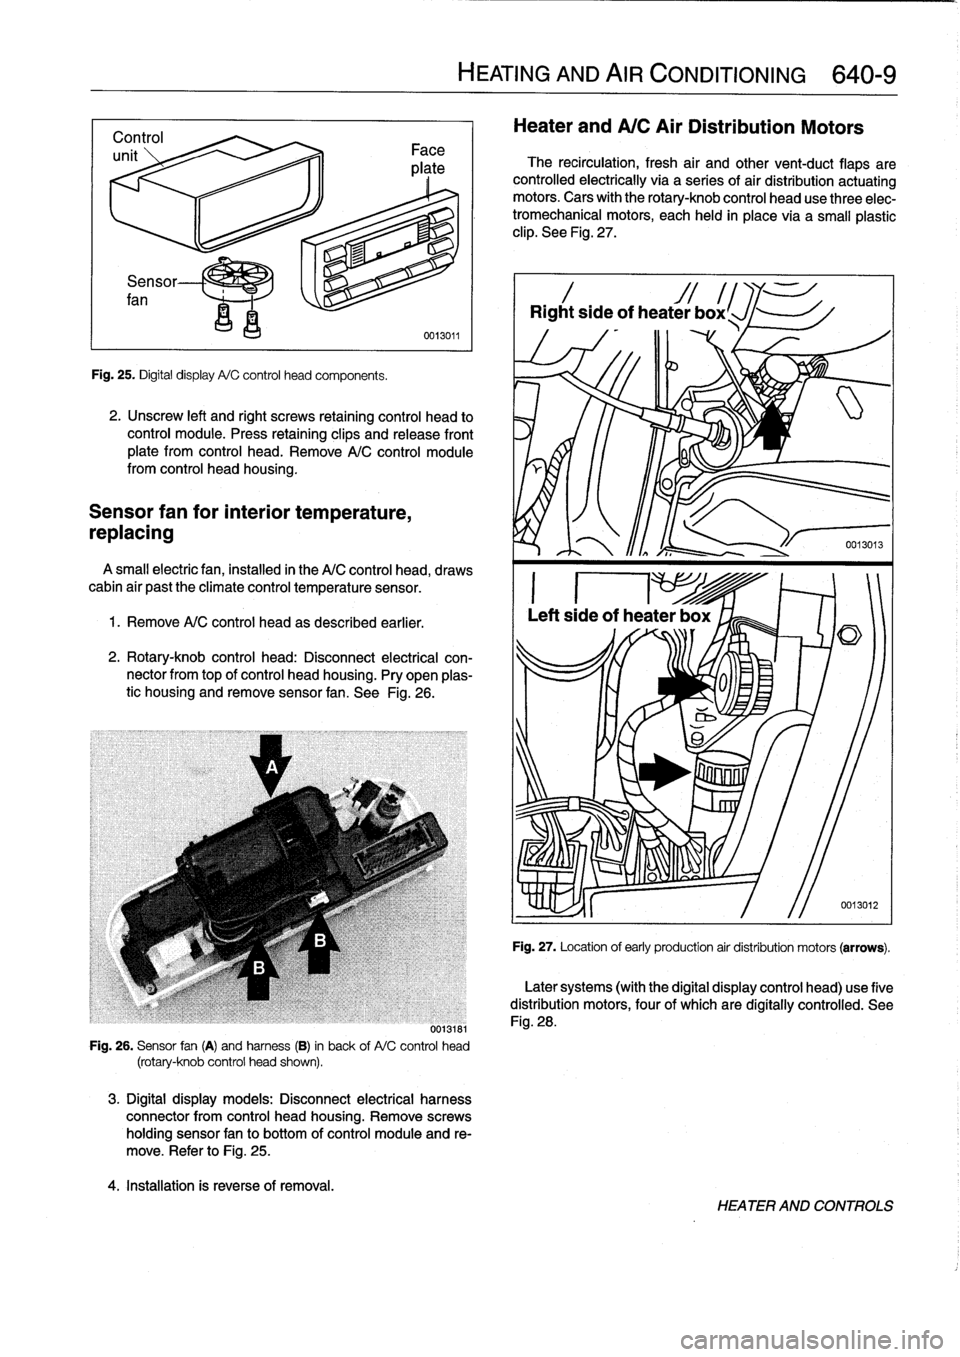 BMW 318i 1998 E36 Service Manual 
Sensor

fan

Fig
.
25
.
Digital
display
A/C
control
head
components
.

2
.
Unscrew
left
and
right
screws
retaining
control
head
to
control
module
.
Press
retaining
clips
and
release
front
plate
from
